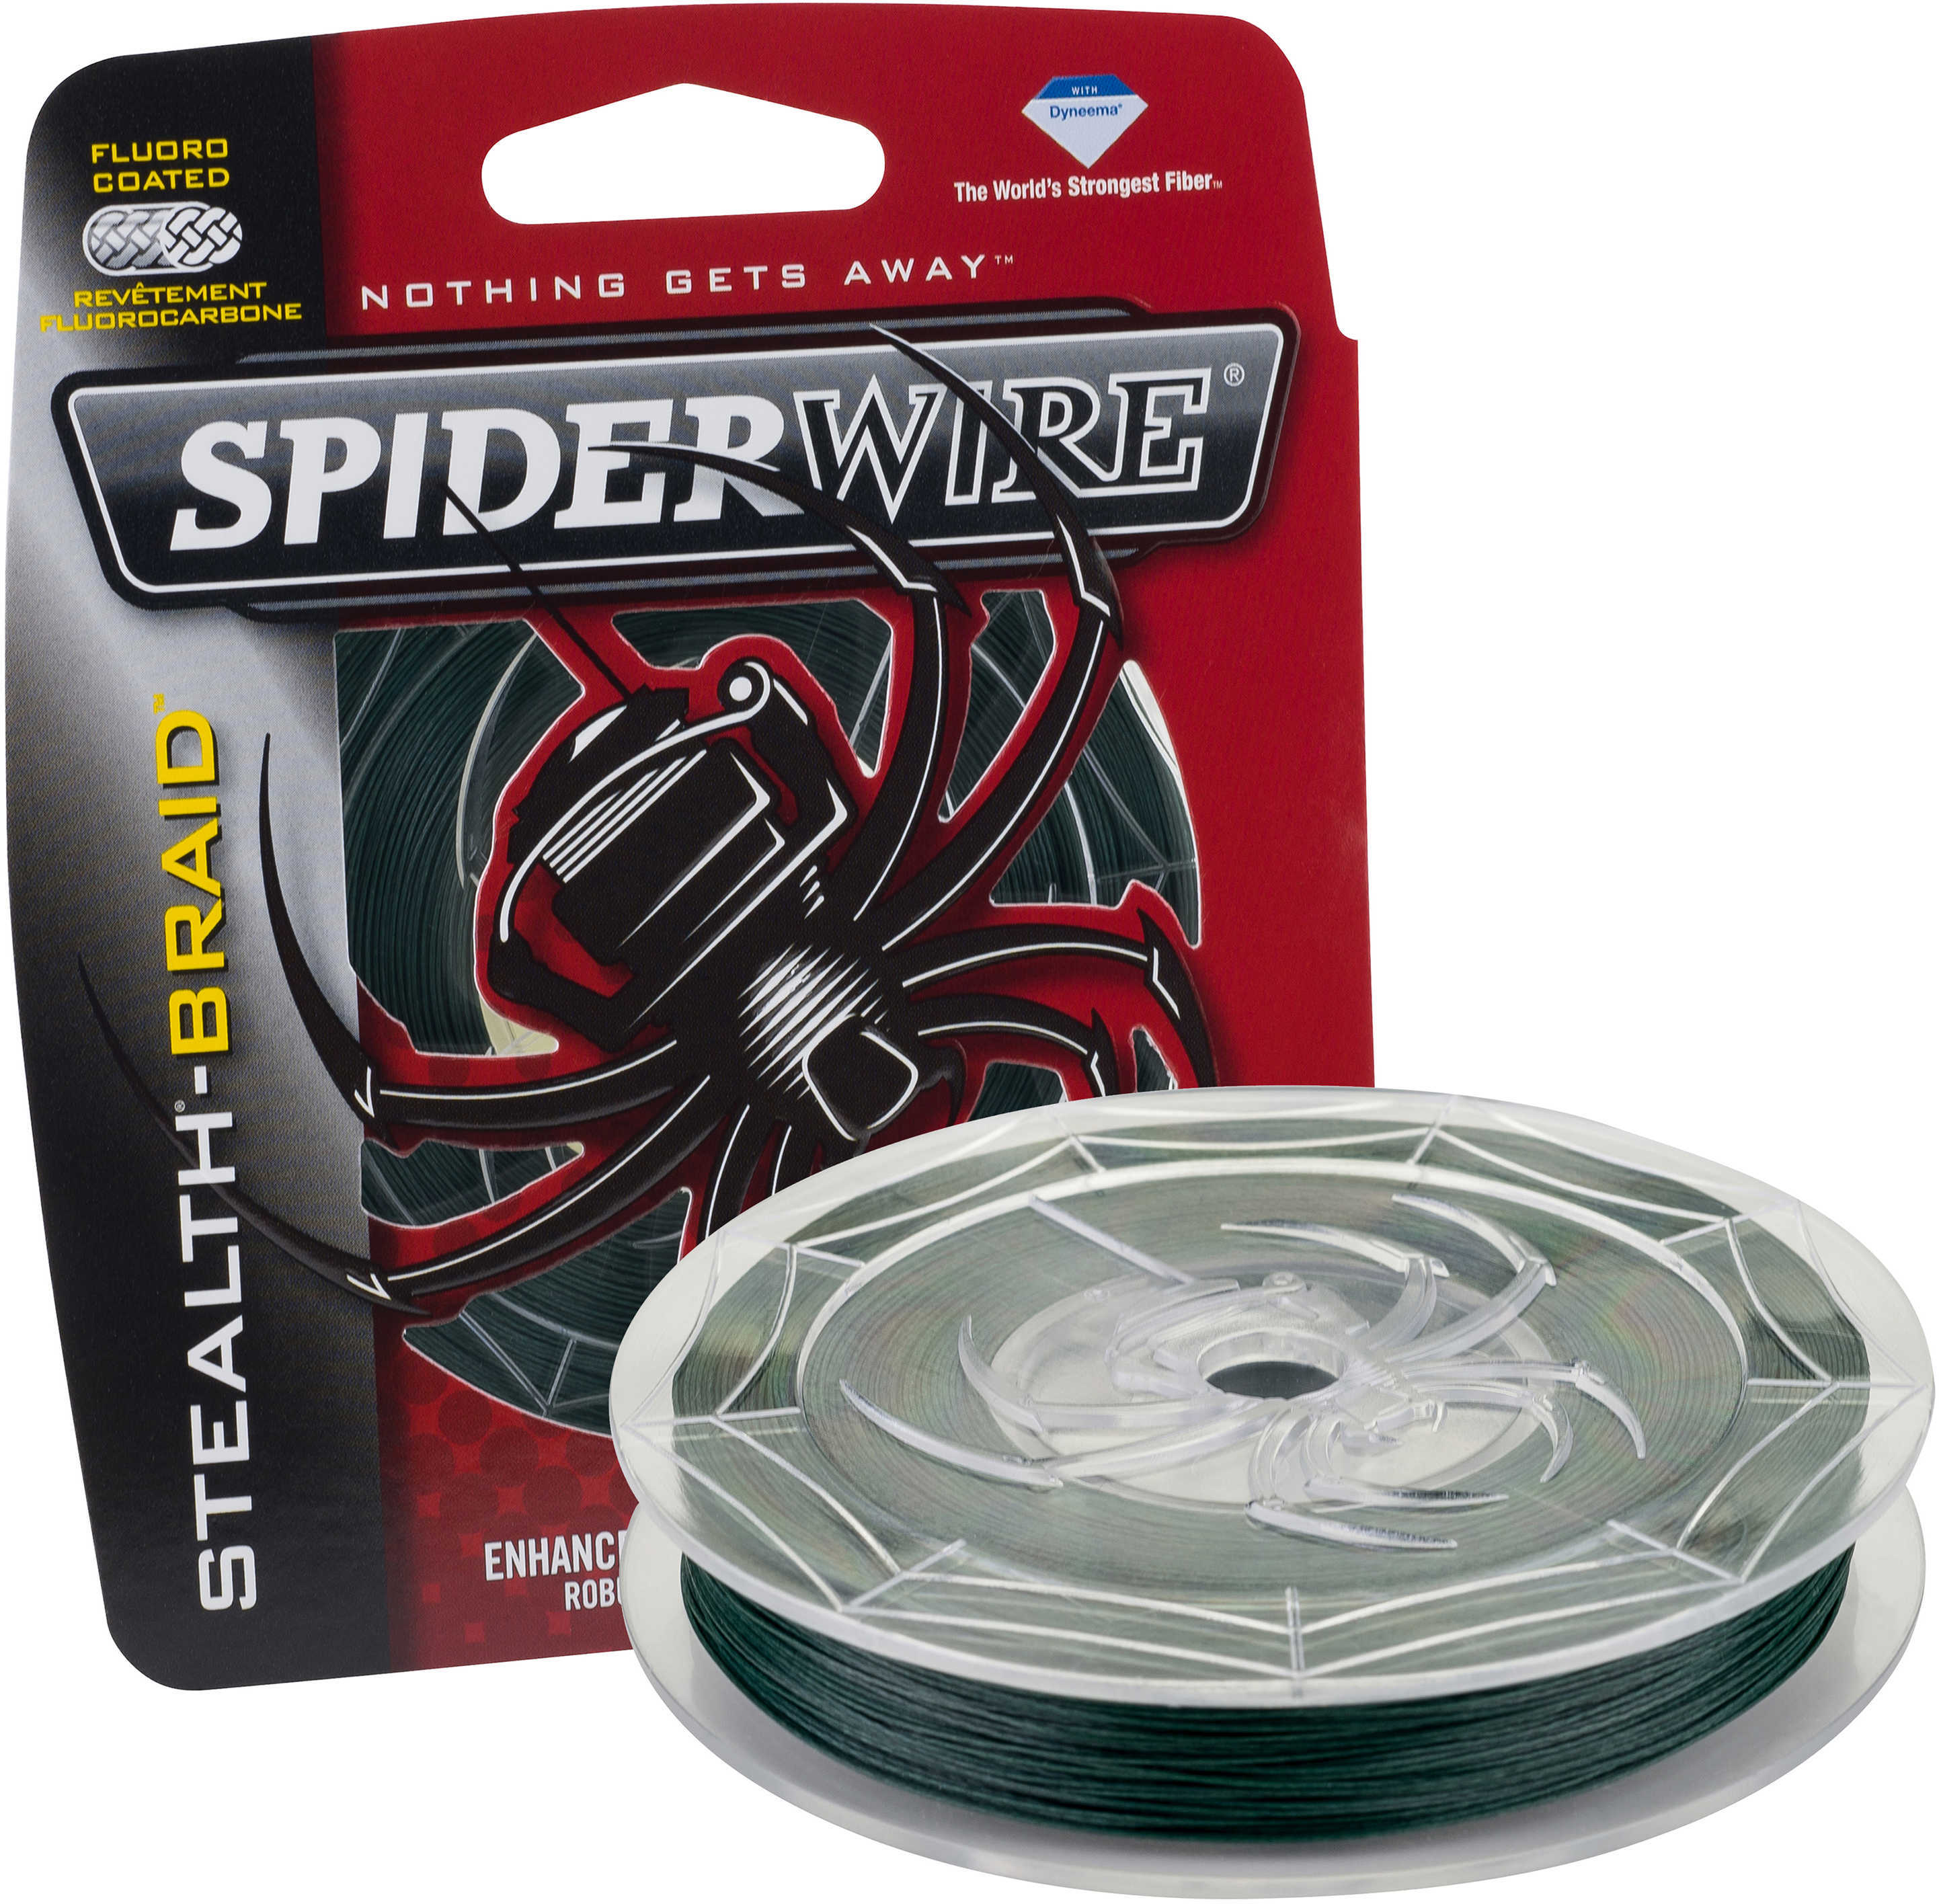 Spiderwire Stealth Braid 200 Yards , 80 lbs Strength, 0.016" Diameter, Moss Green Md: 1374604